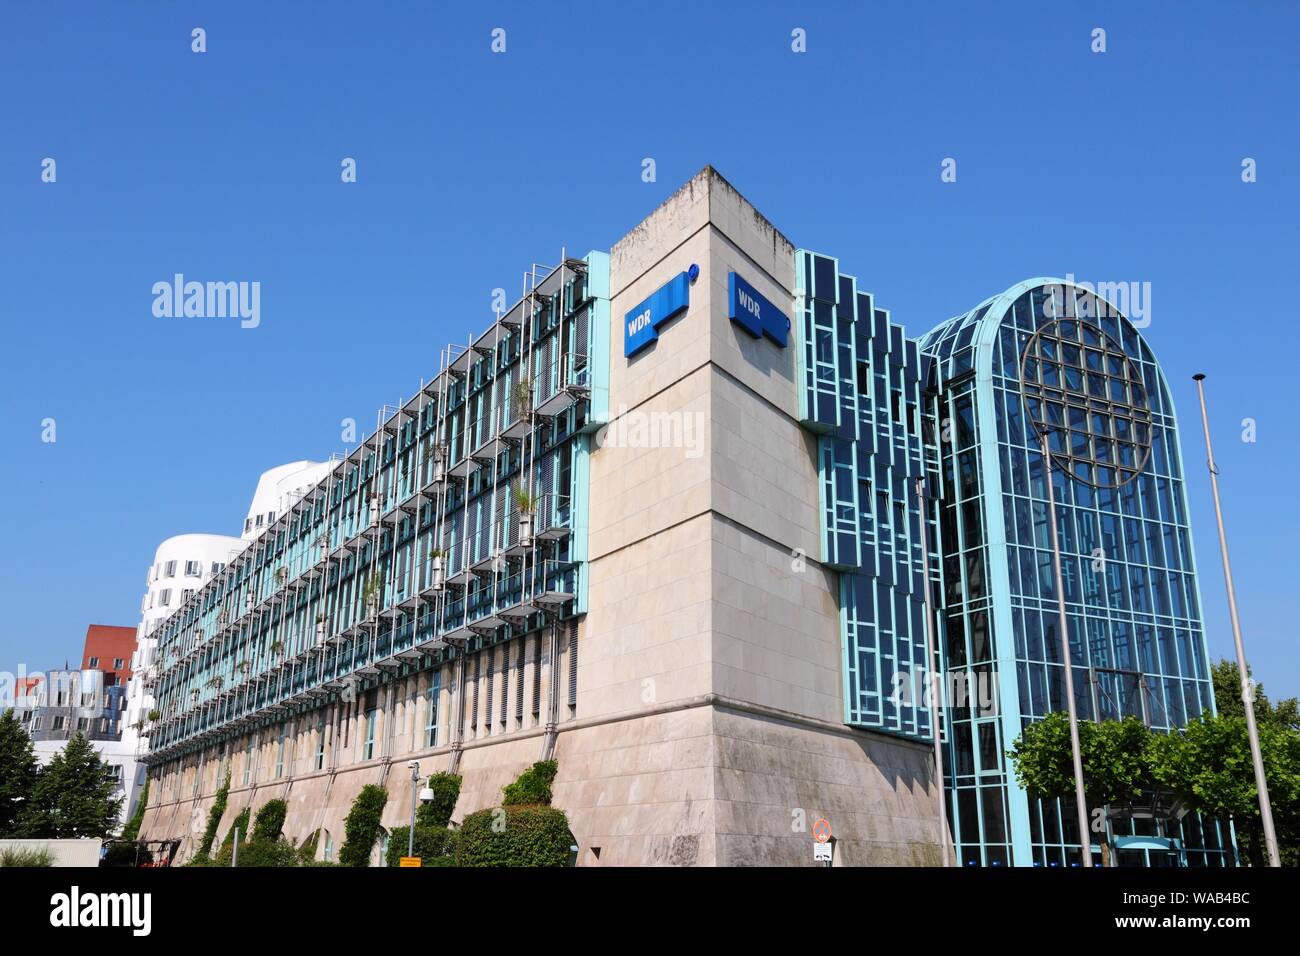 DUSSELDORF, GERMANY - JULY 8, 2013: WDR (Westdeutscher Rundfunk) television  and radio building in Dusseldorf. WDR is a public broadcasting institution  Stock Photo - Alamy